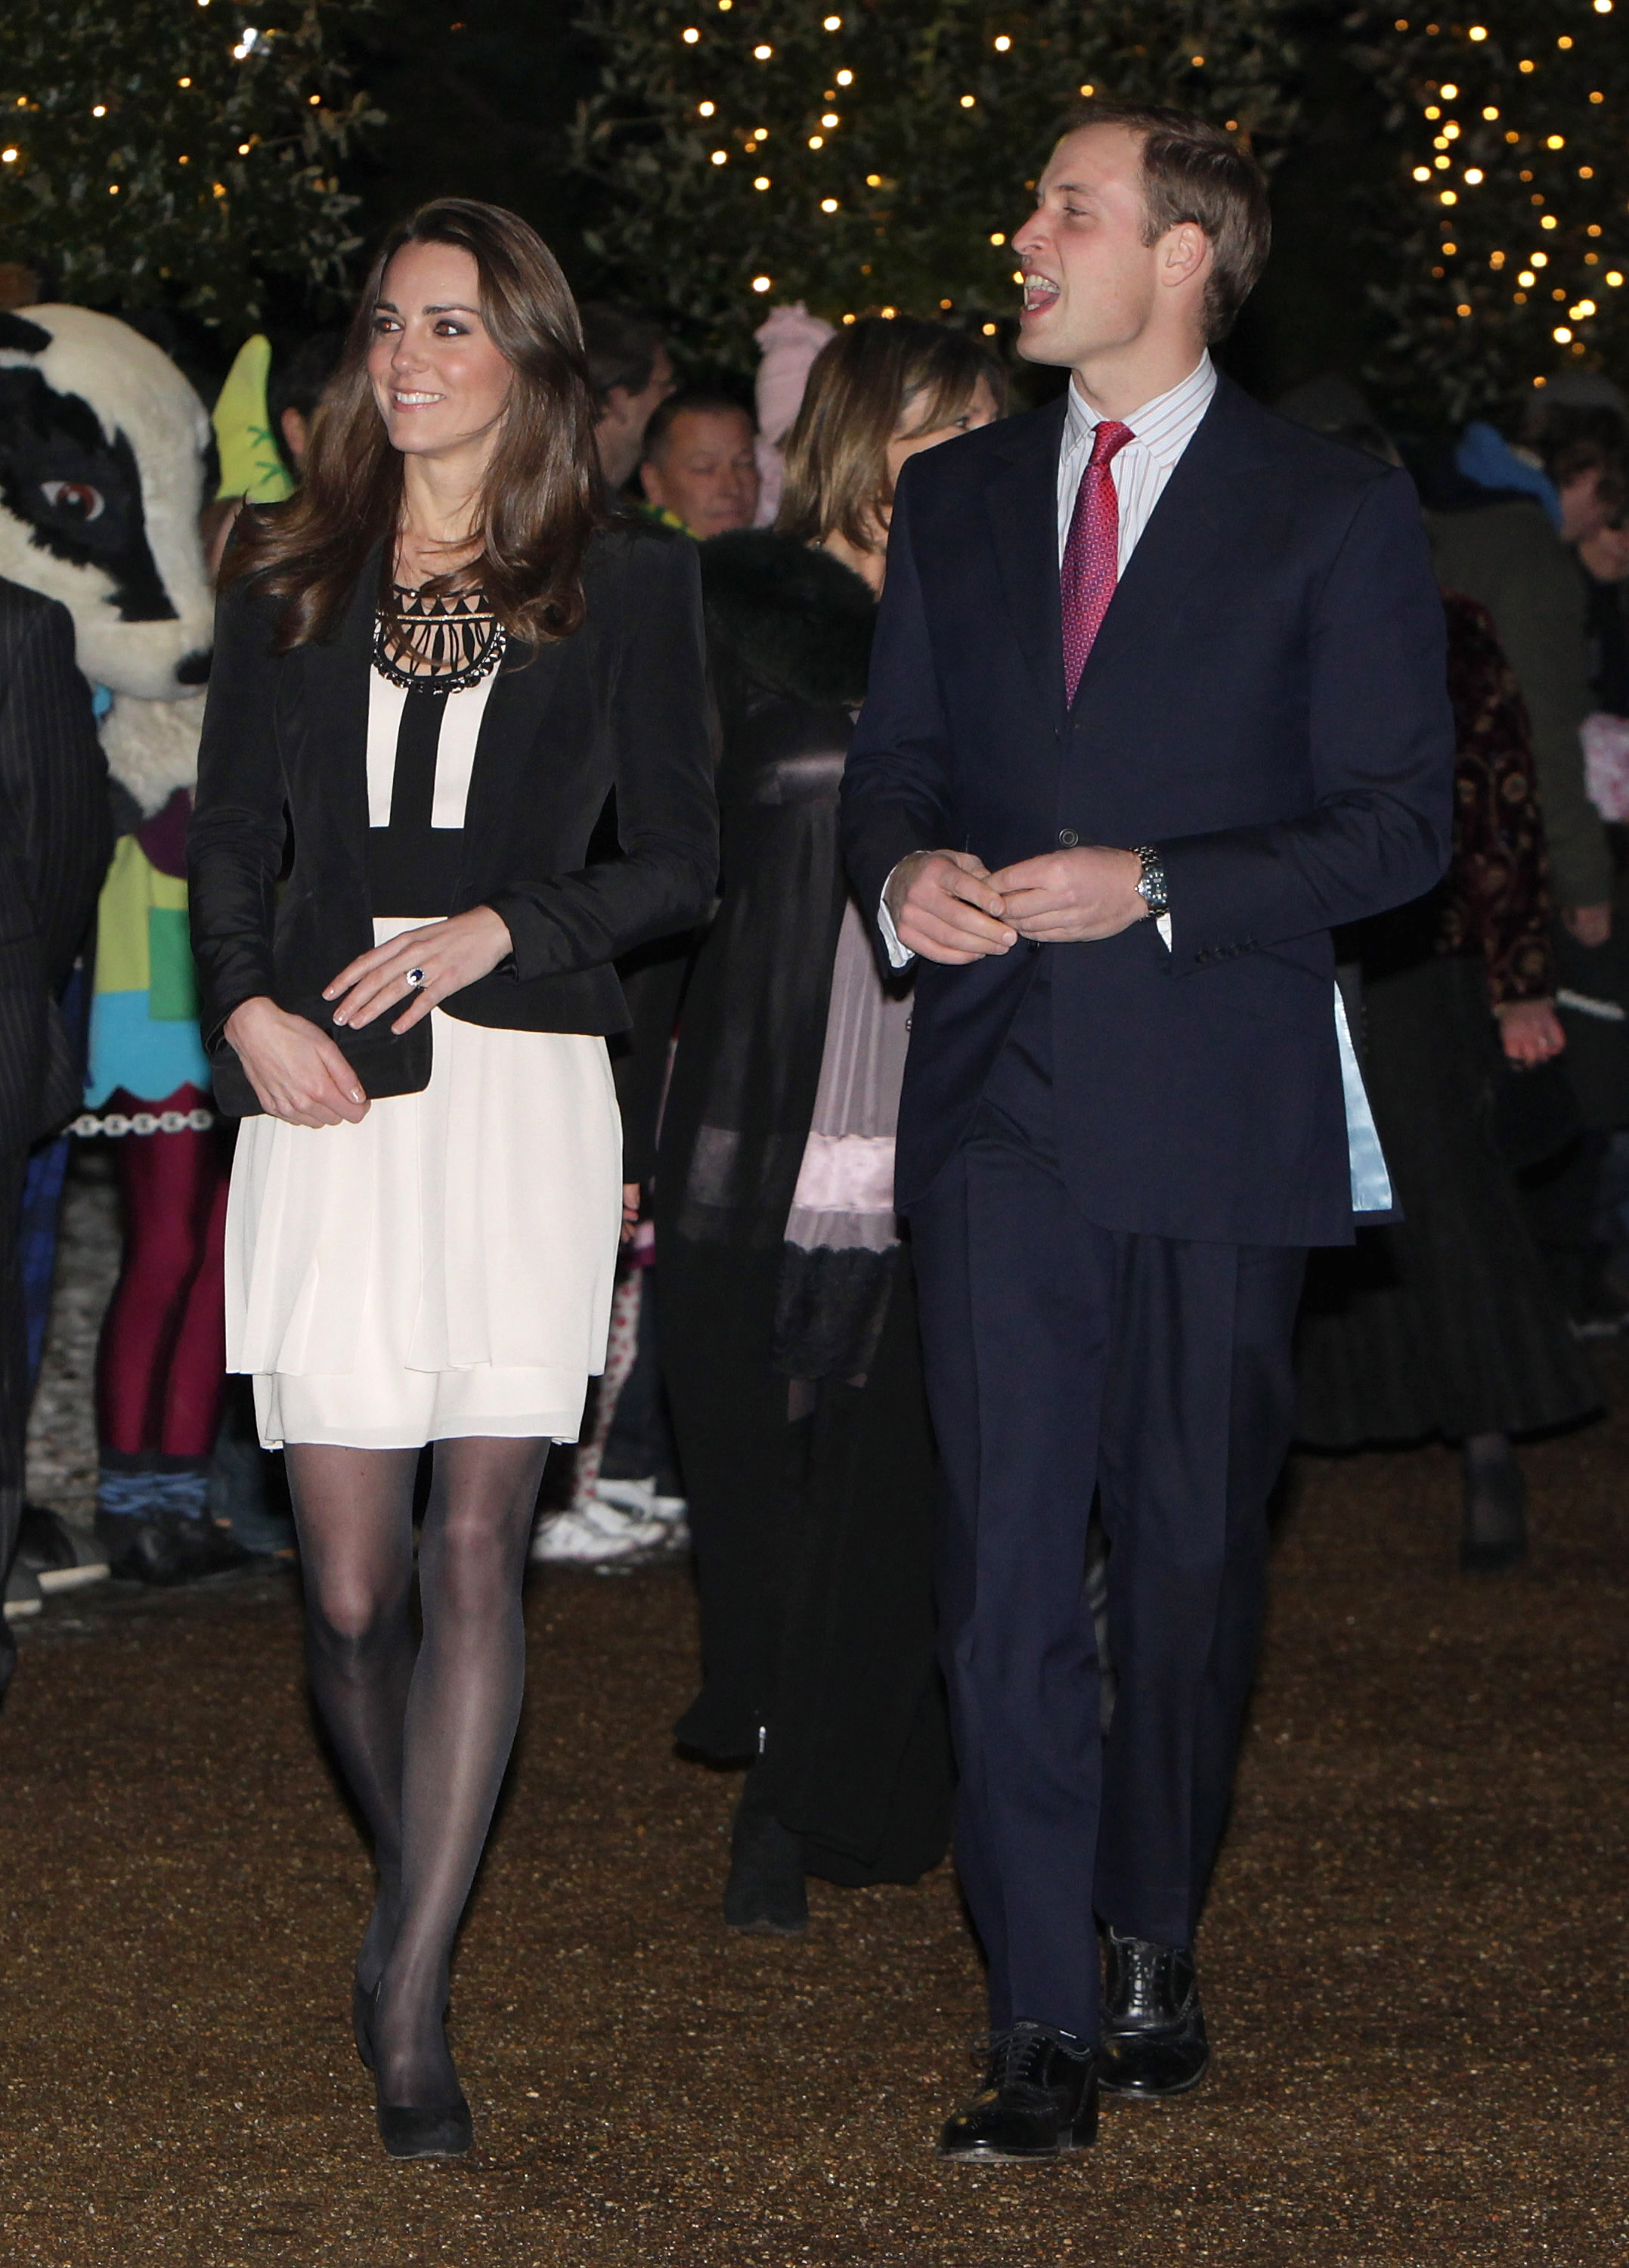 Prince William and Catherine Middleton at a Christmas reception in aid of the Teenager Cancer Trust on December 18, 2010 in Fakenham, England | Source: Getty Images